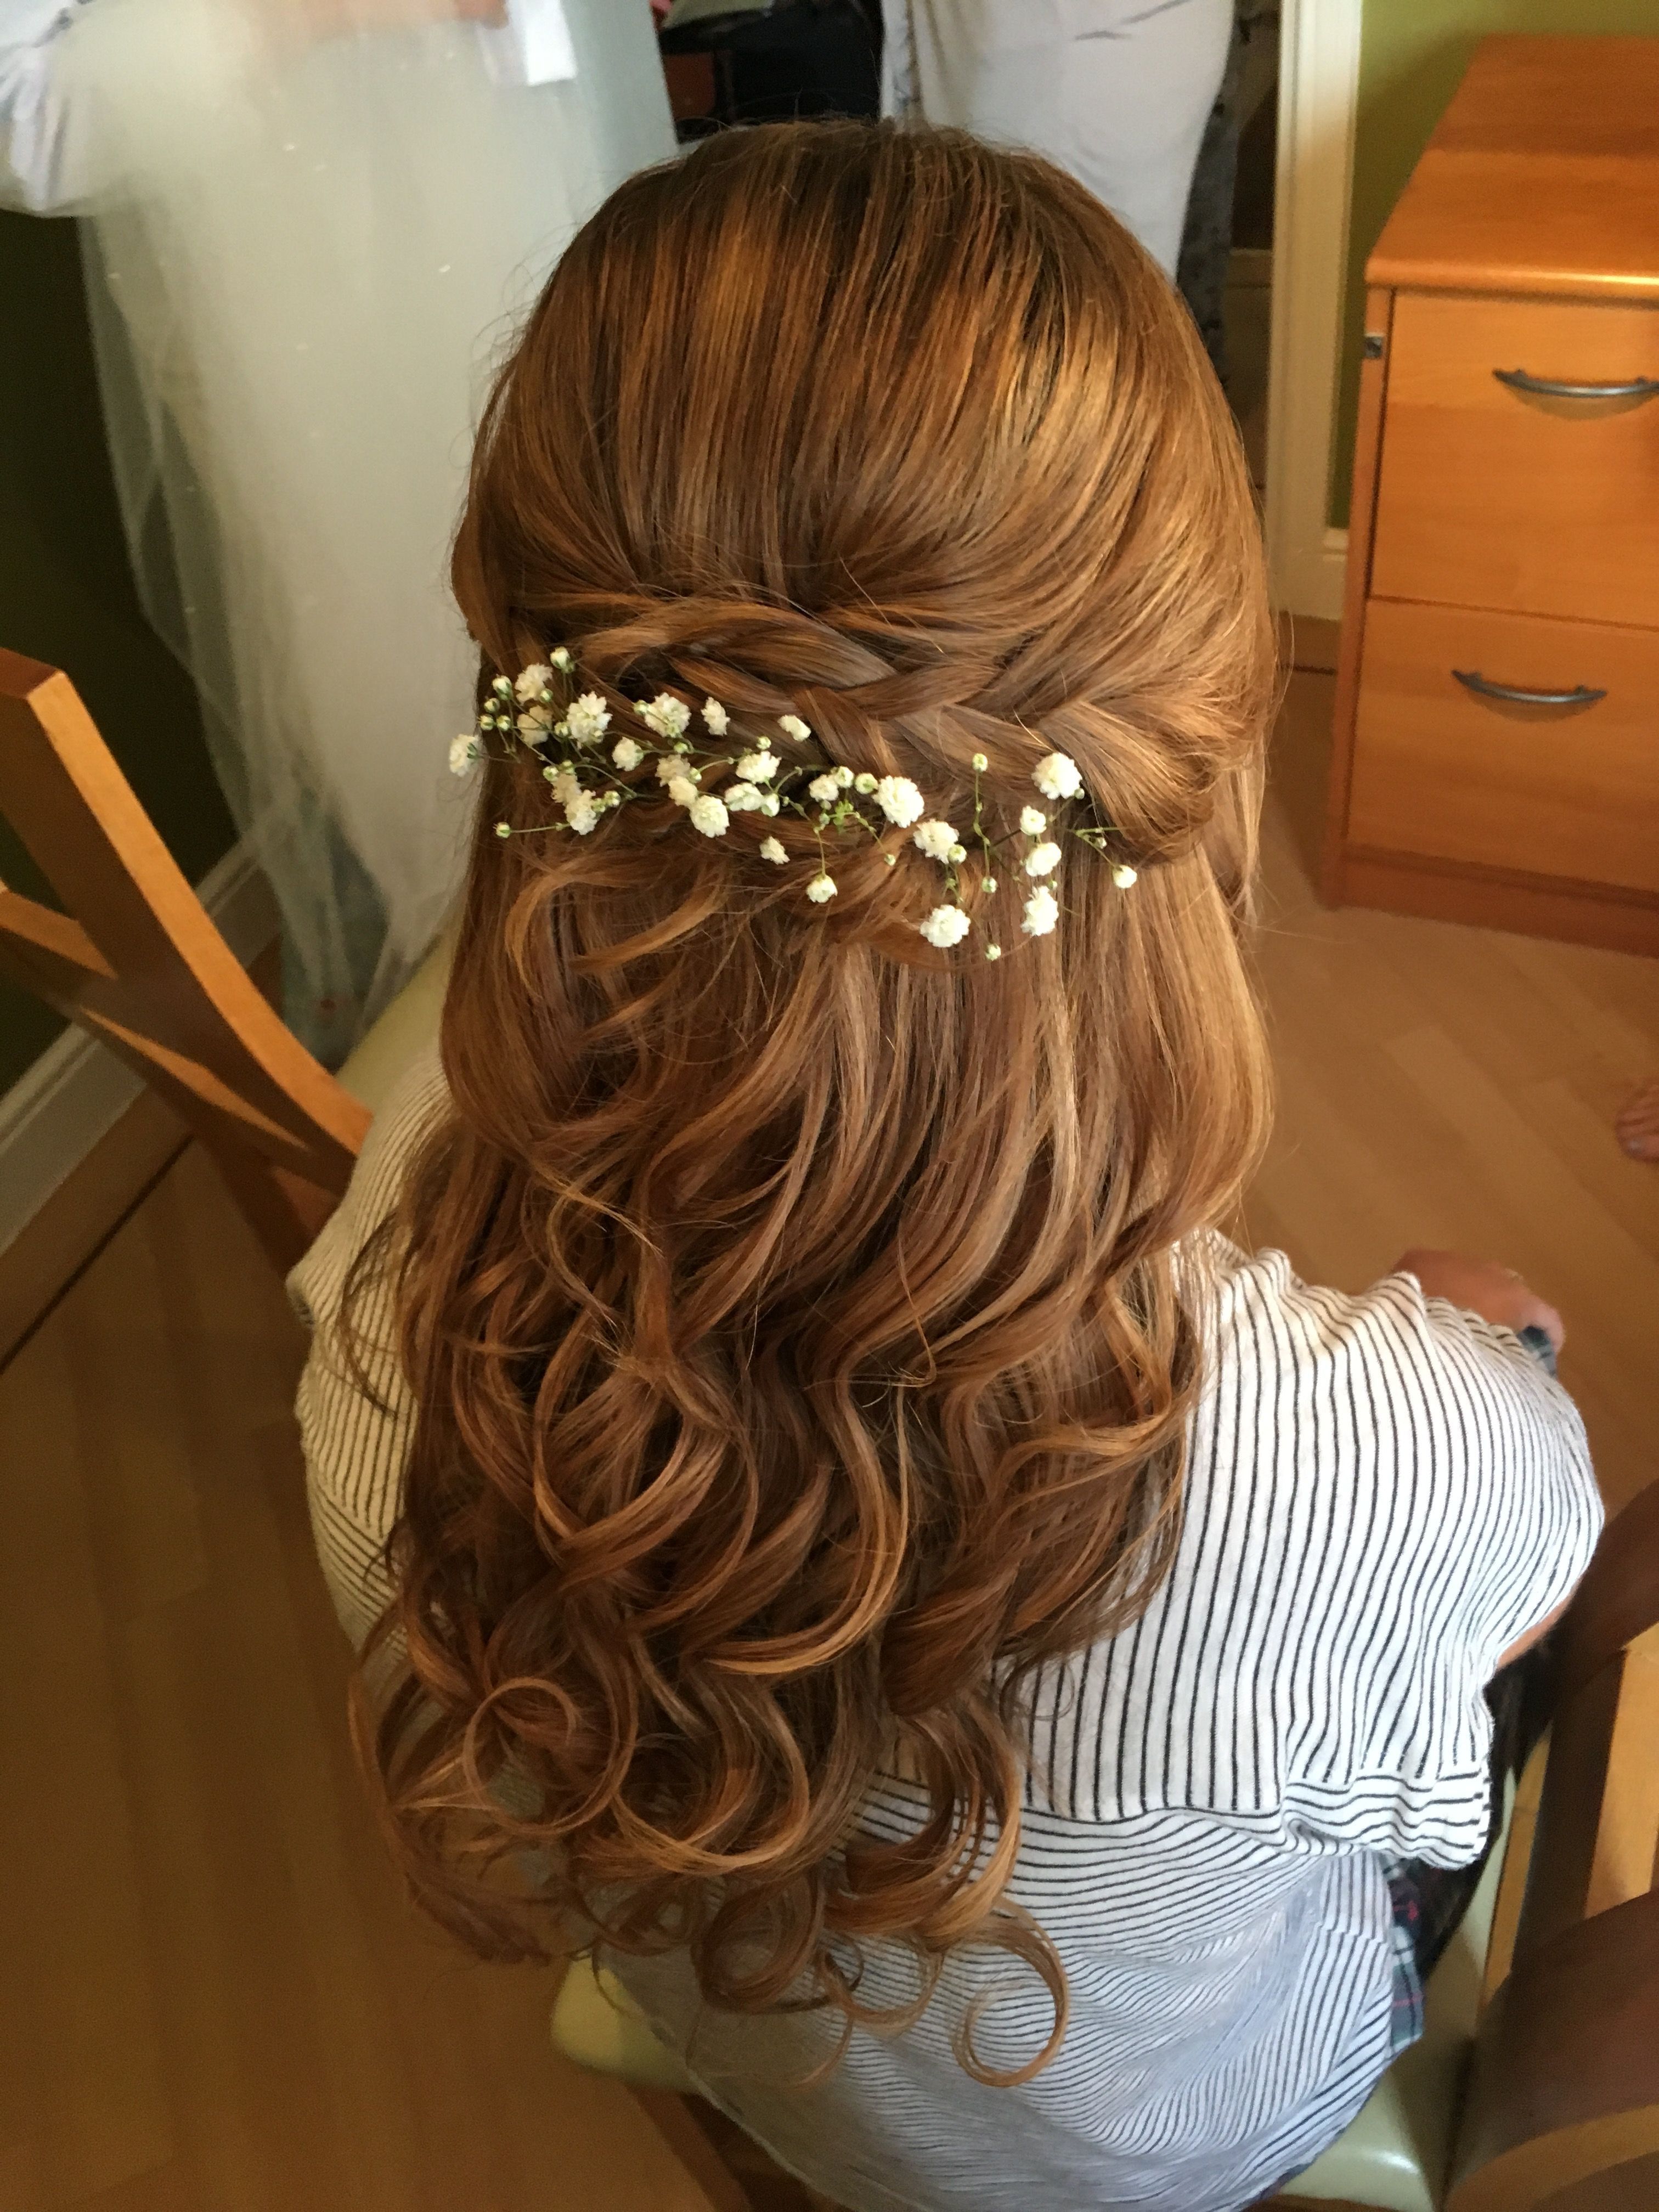 Well Liked Diagonal Waterfall Braid In Half Up Bridal Hairstyles With Regard To Bridesmaid Long Hair With Extensions Curled And Styled With Braid (View 3 of 20)